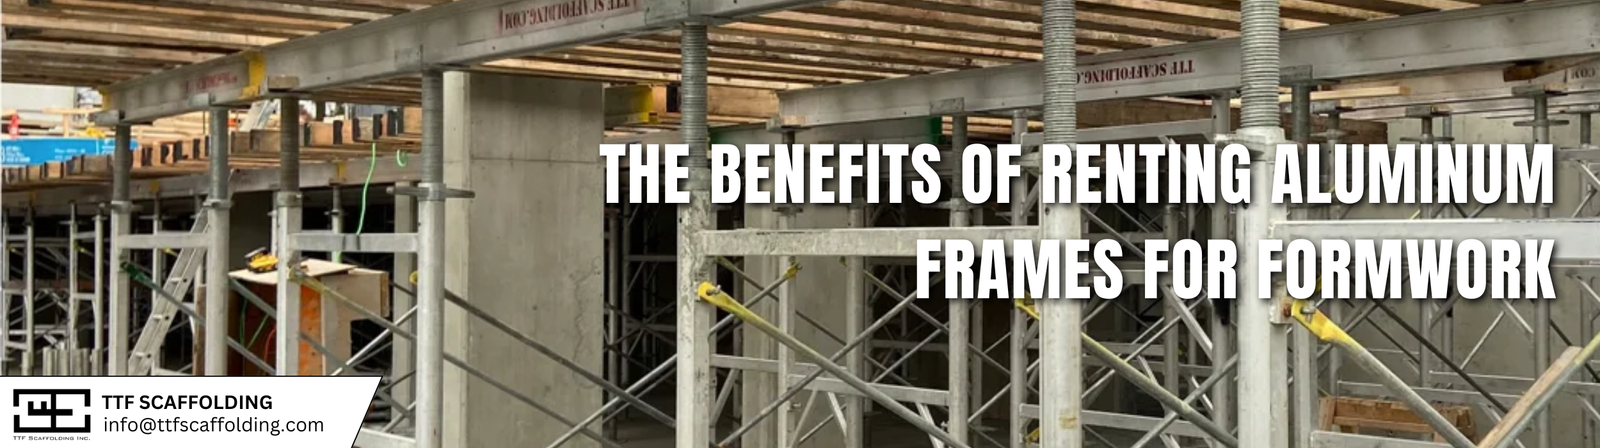 The Benefits of Renting Aluminum Frames for Formwork